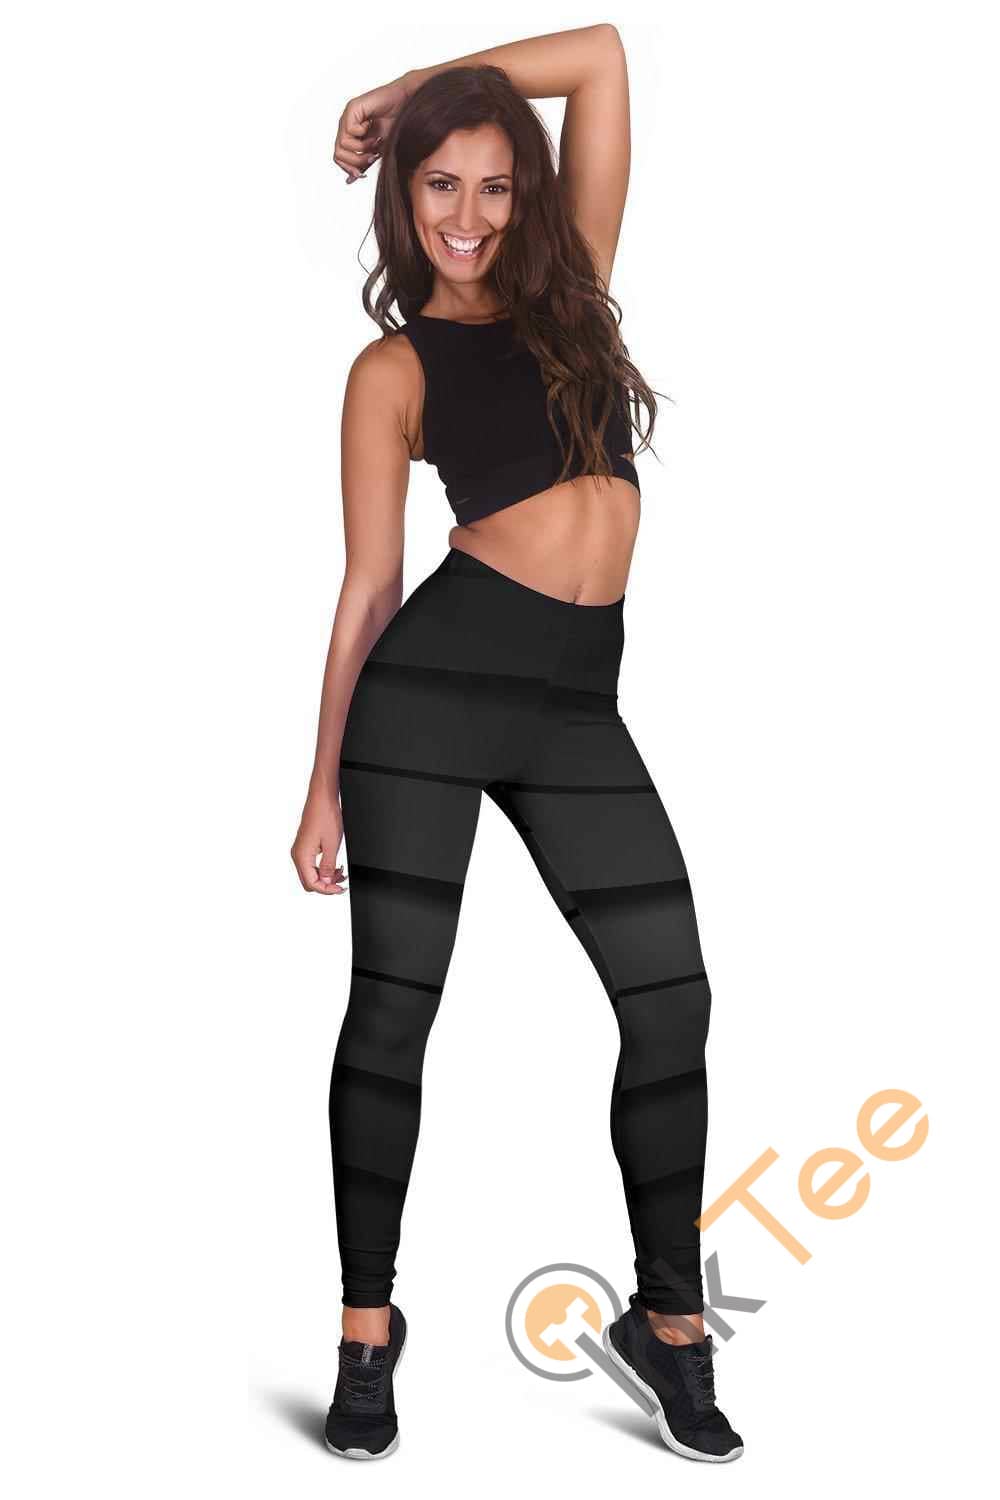 Inktee Store - Black Abstract 3D All Over Print For Yoga Fitness Women'S Leggings Image